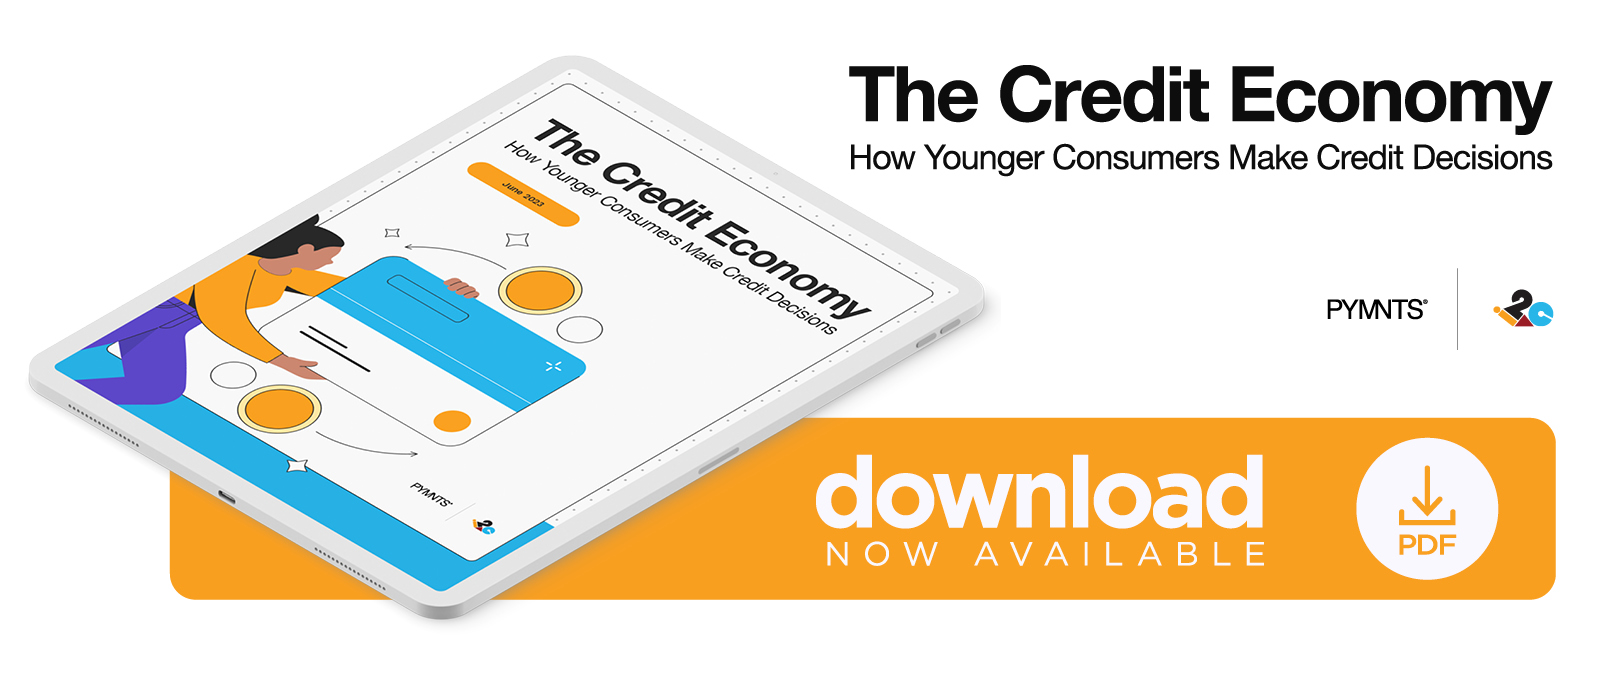 Credit product usage varies by generation, as does the choice of what product to use, with credit cards and buy now, pay later popular for younger demographics.